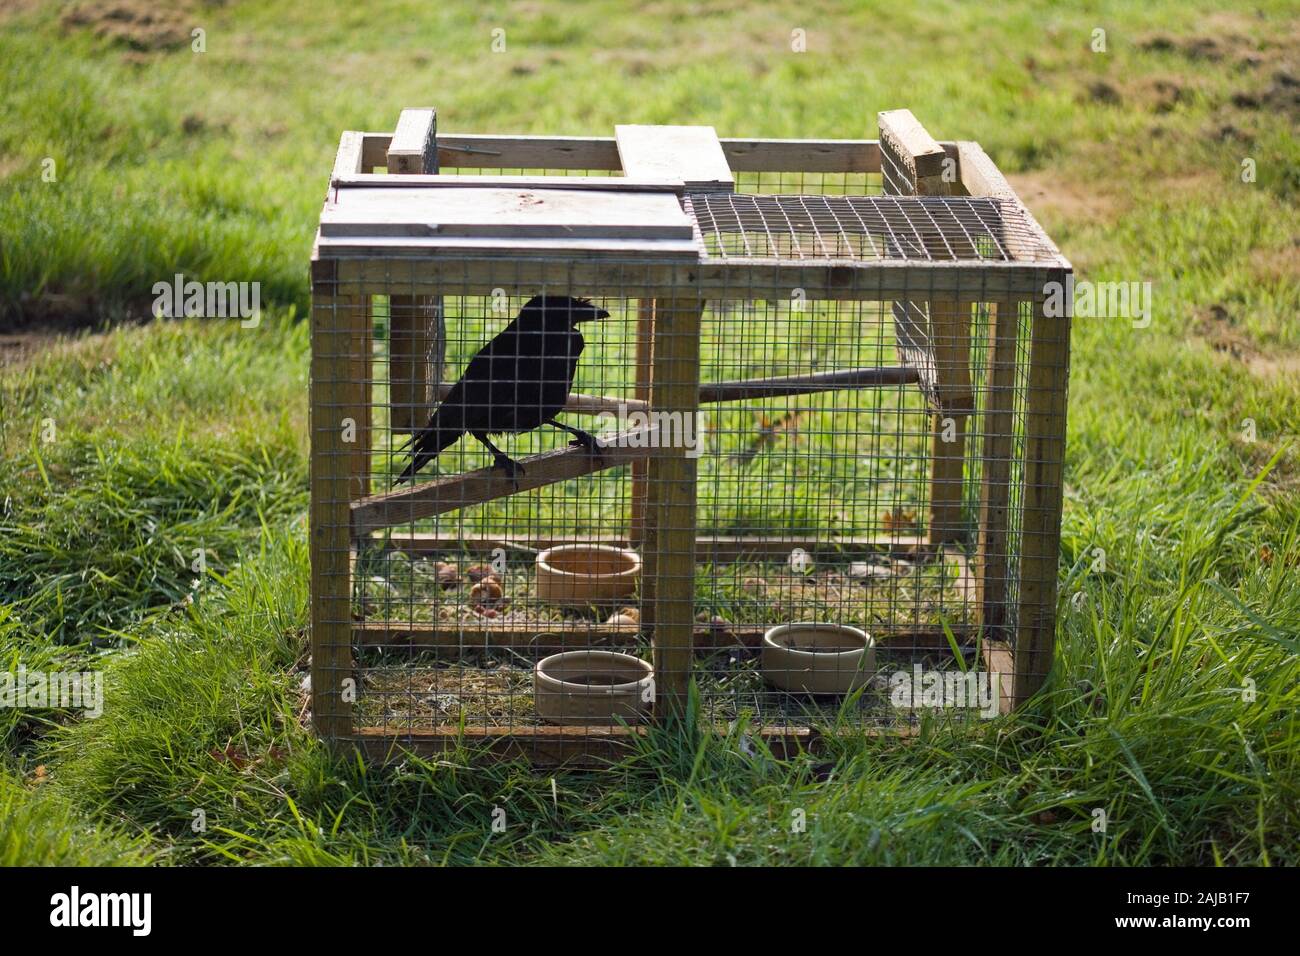 LARSEN TRAP used for controlling numbers of corvids (crows), considered as pests or 'vermin' by game managed estates and others. Live decoy bird used. Stock Photo